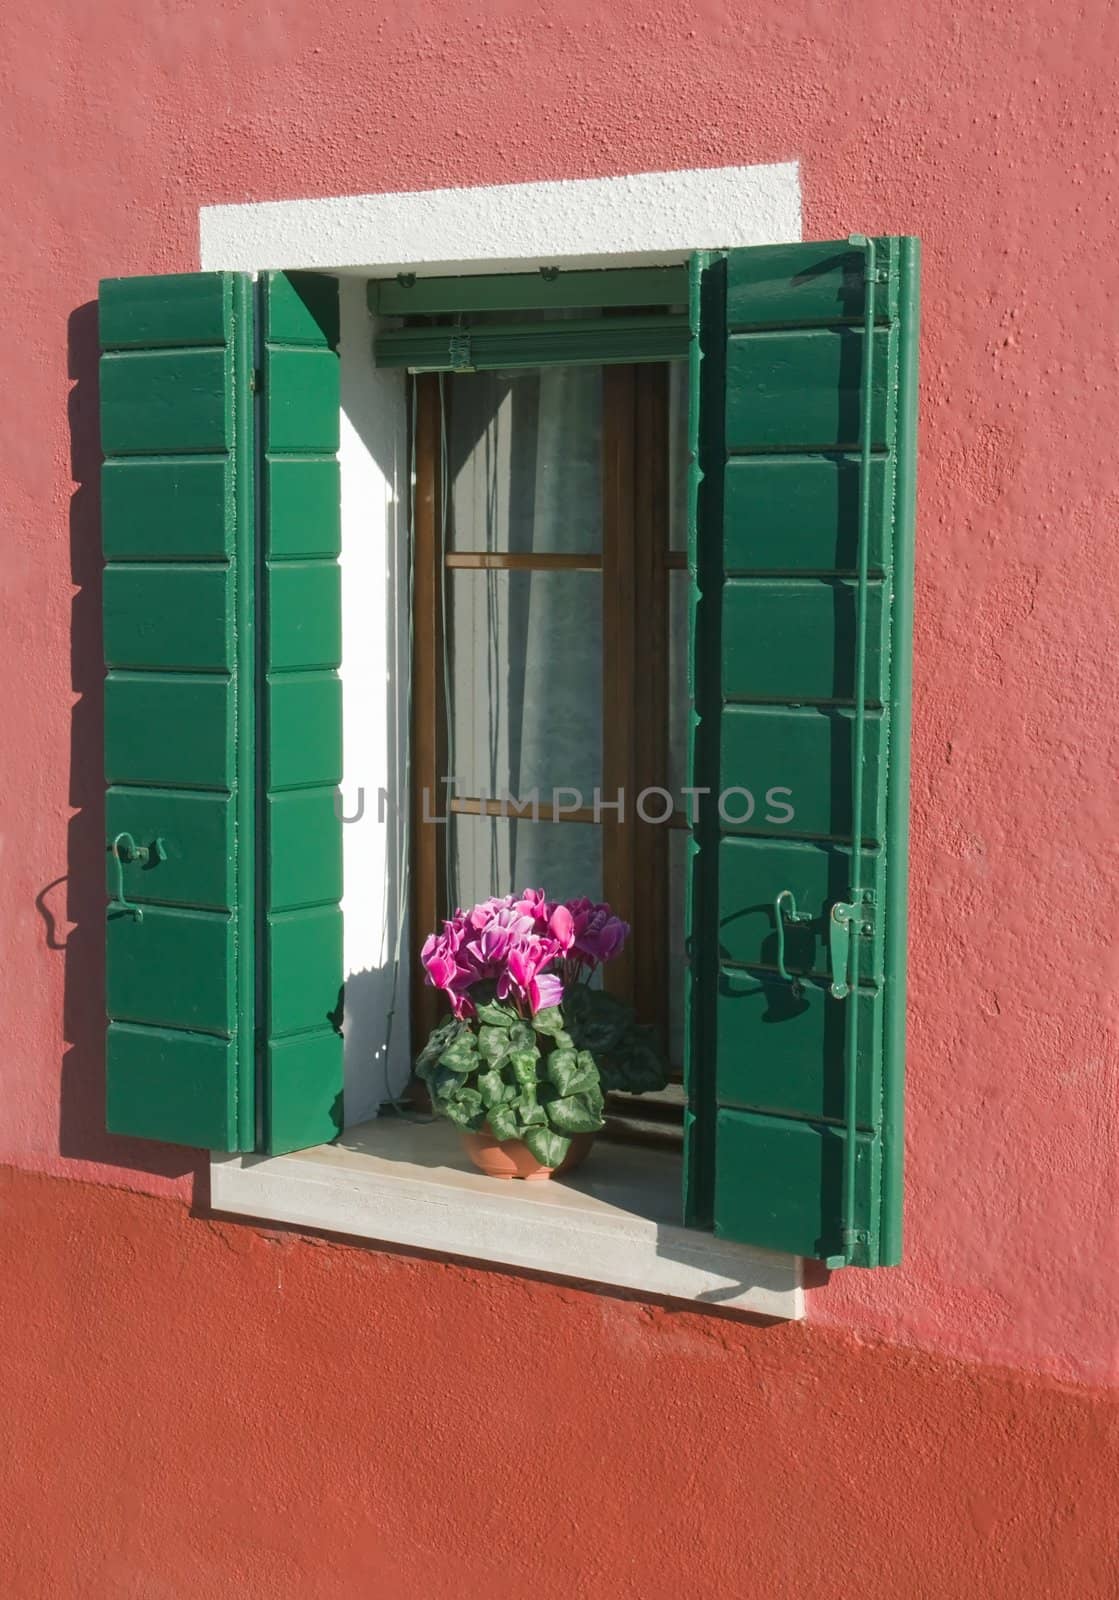 Window of a house from the island of Burano in Italy near Venice